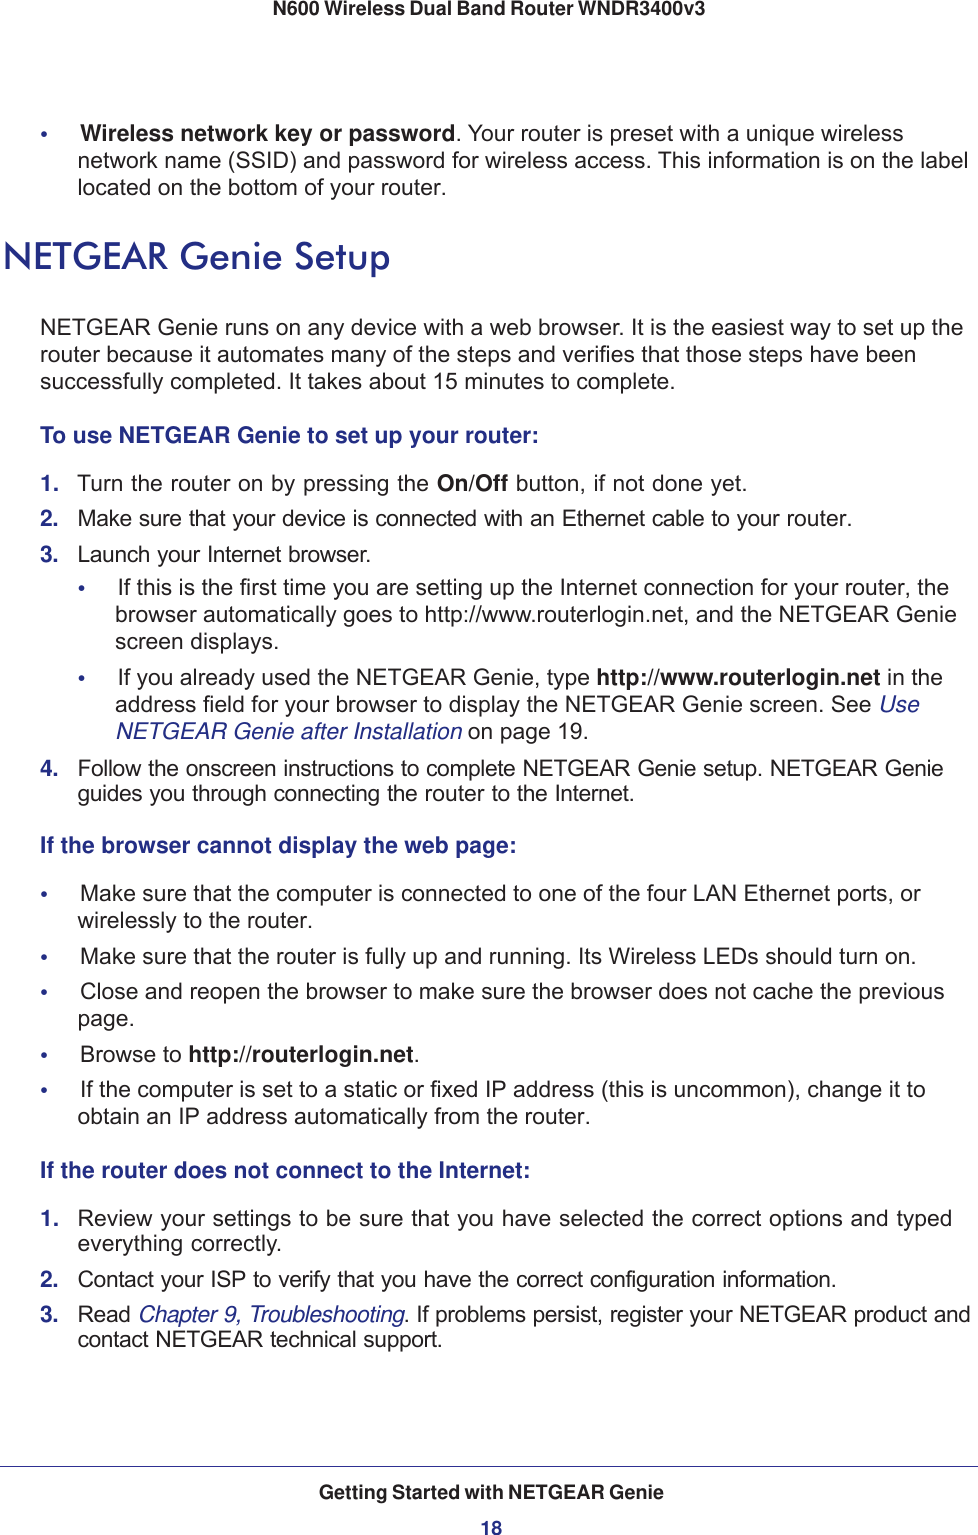 Getting Started with NETGEAR Genie18N600 Wireless Dual Band Router WNDR3400v3 •     Wireless network key or password. Your router is preset with a unique wireless network name (SSID) and password for wireless access. This information is on the label located on the bottom of your router.NETGEAR Genie SetupNETGEAR Genie runs on any device with a web browser. It is the easiest way to set up the router because it automates many of the steps and verifies that those steps have been successfully completed. It takes about 15  minutes to complete. To use NETGEAR Genie to set up your router:1.  Turn the router on by pressing the On/Off button, if not done yet. 2.  Make sure that your device is connected with an Ethernet cable to your router.3.  Launch your Internet browser.•     If this is the first time you are setting up the Internet connection for your router, the browser automatically goes to http://www.routerlogin.net, and the NETGEAR Genie screen displays.•     If you already used the NETGEAR Genie, type http://www.routerlogin.net in the address field for your browser to display the NETGEAR Genie screen. See Use NETGEAR Genie after Installation on page  19.4.  Follow the onscreen instructions to complete NETGEAR Genie setup. NETGEAR Genie guides you through connecting the router to the Internet. If the browser cannot display the web page: •     Make sure that the computer is connected to one of the four LAN Ethernet ports, or wirelessly to the router.•     Make sure that the router is fully up and running. Its Wireless LEDs should turn on.•     Close and reopen the browser to make sure the browser does not cache the previous page.•     Browse to http://routerlogin.net.•     If the computer is set to a static or fixed IP address (this is uncommon), change it to obtain an IP address automatically from the router.If the router does not connect to the Internet:1.  Review your settings to be sure that you have selected the correct options and typed everything correctly. 2.  Contact your ISP to verify that you have the correct configuration information.3.  Read Chapter 9, Troubleshooting. If problems persist, register your NETGEAR product and contact NETGEAR technical support.